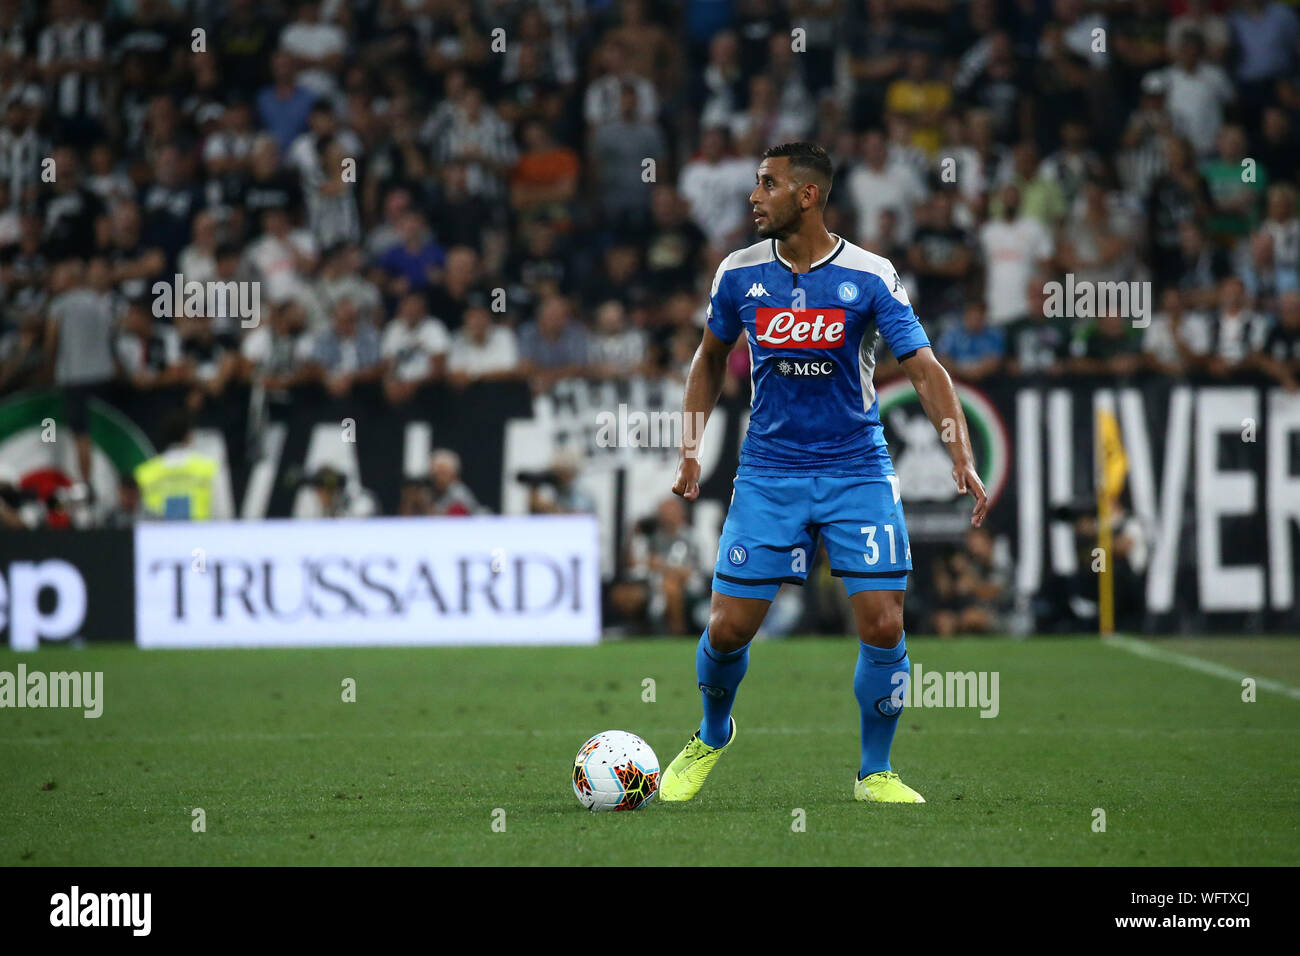 Torino, Italy. 31th Aug, 2019 .Faouzi Ghoulam of Ssc Napoli in action during the Serie A match  between Juventus Fc and Ssc Napoli. Credit: Marco Canoniero/Alamy Live News Stock Photo